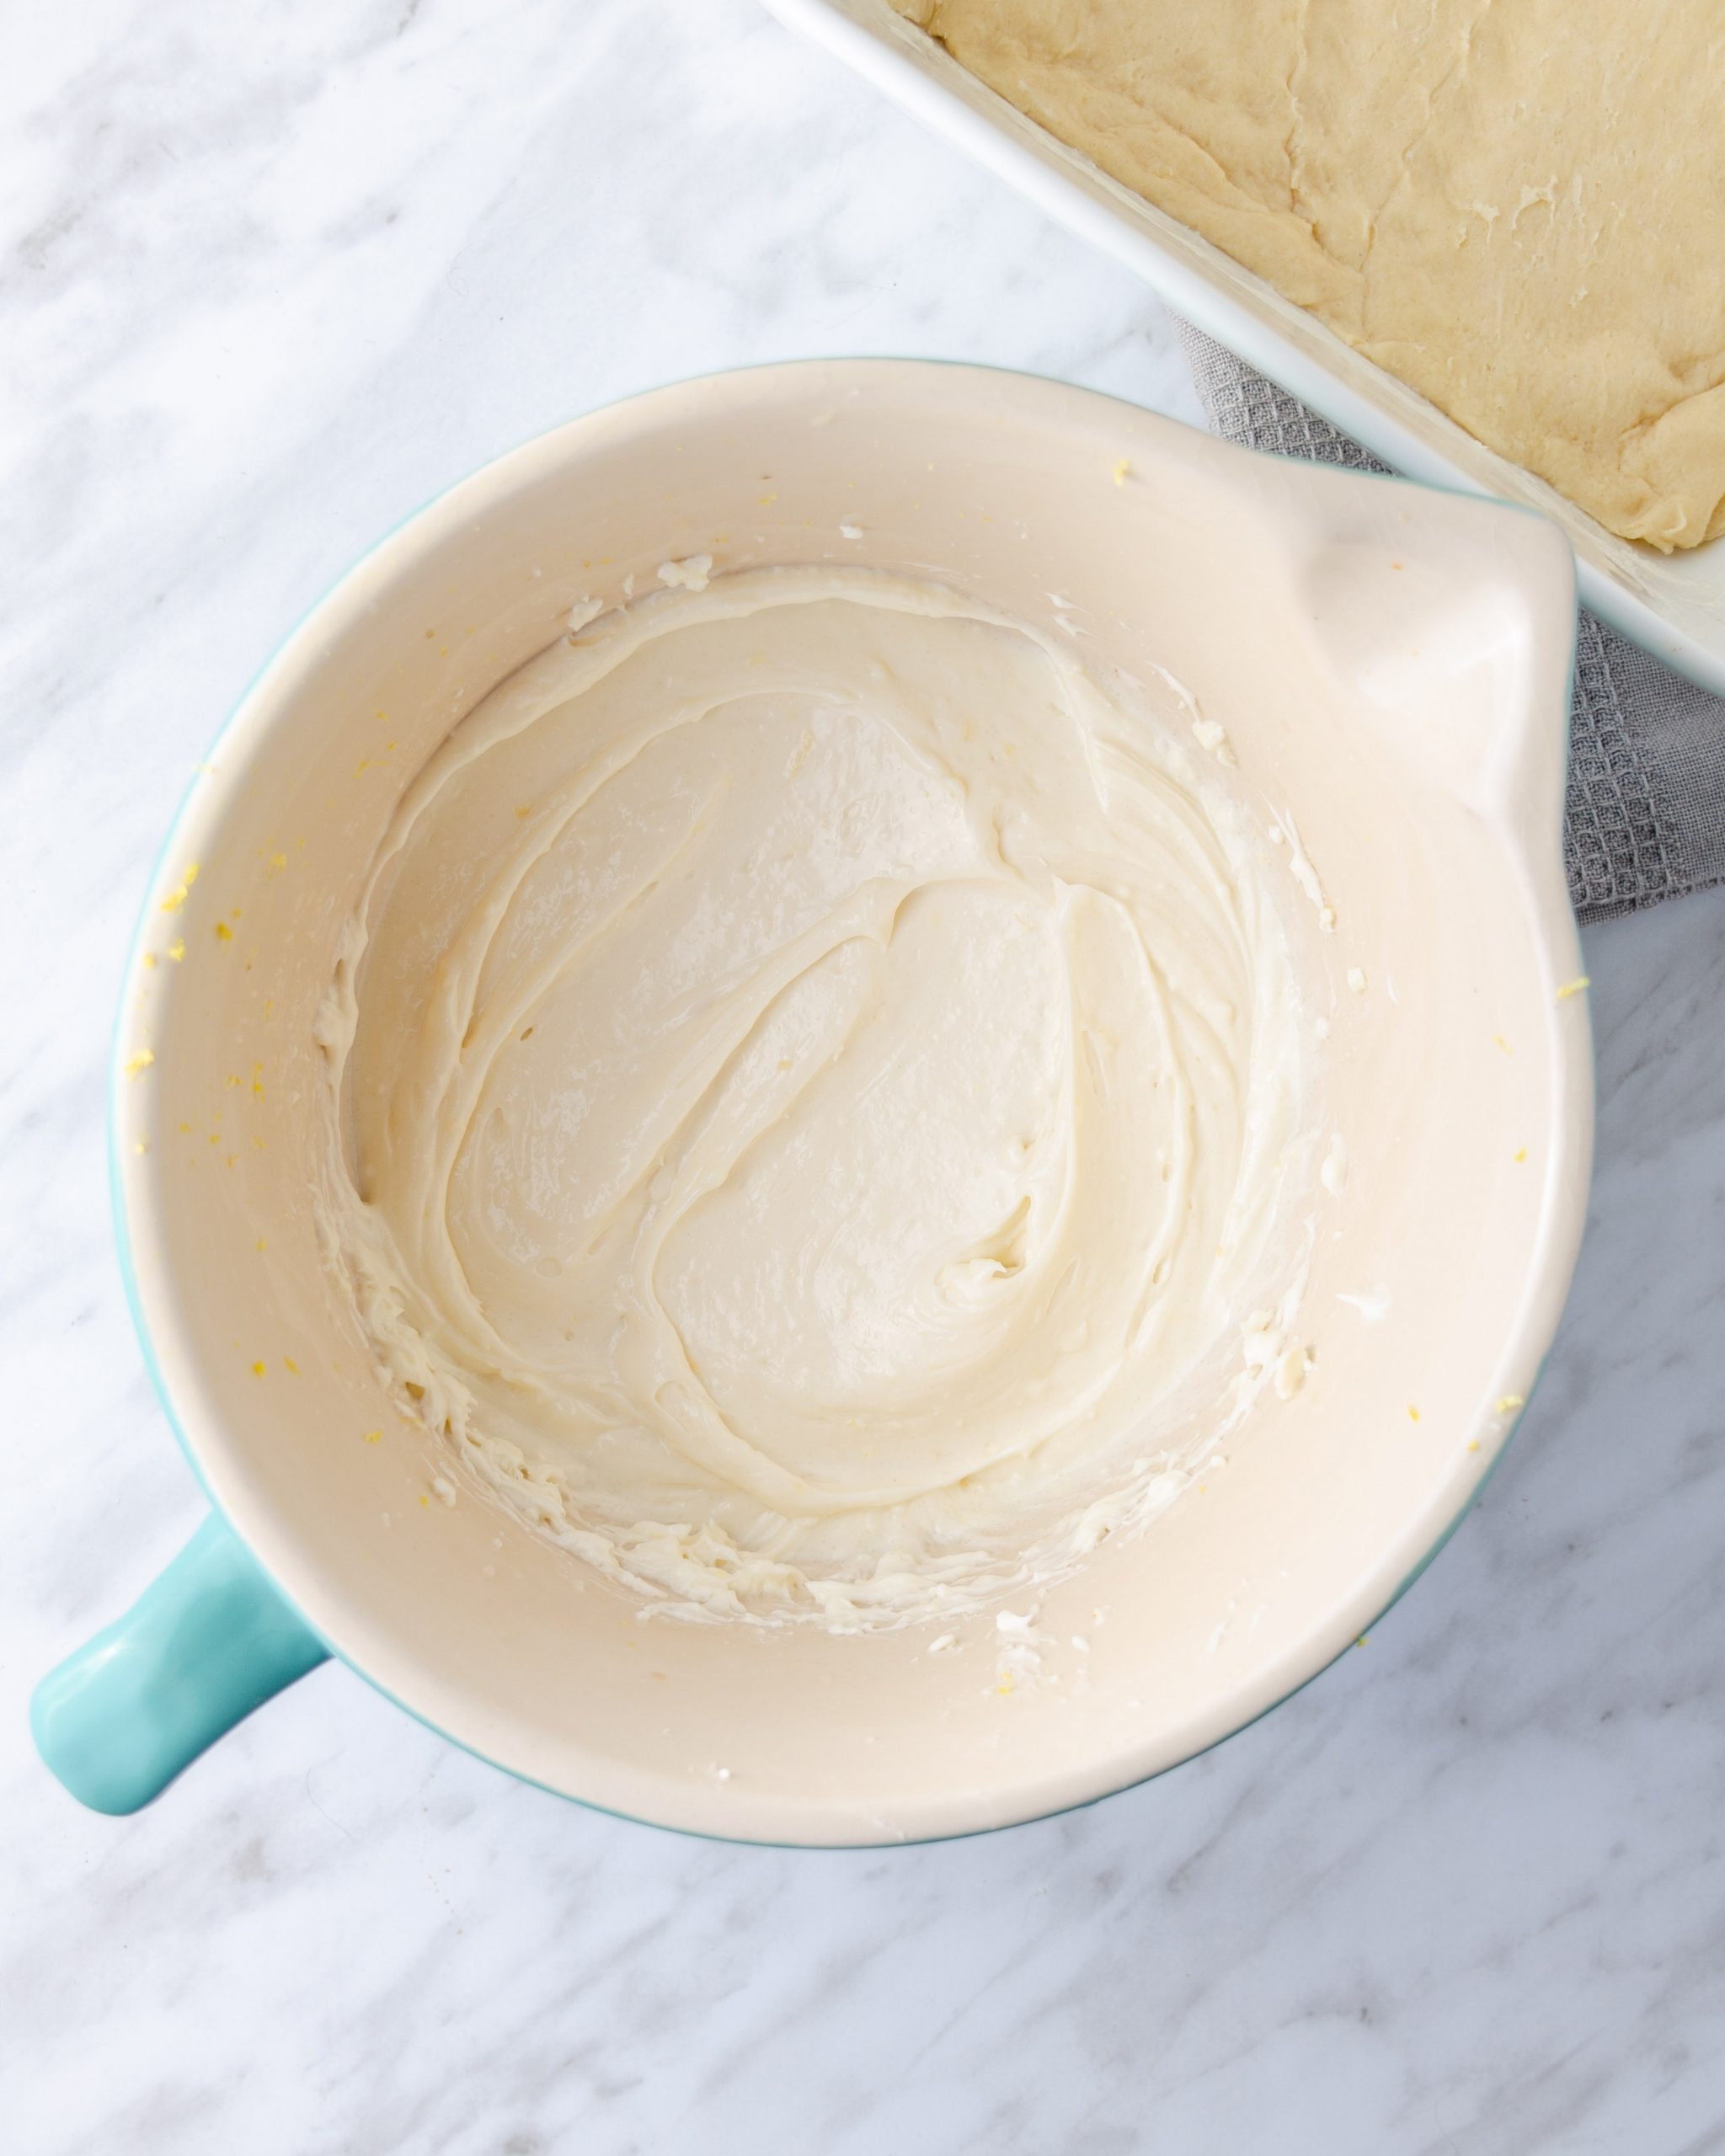 Combine the cream cheese, vanilla, lemon juice, lemon zest, and ½ cup of sugar in a mixing bowl until smooth.